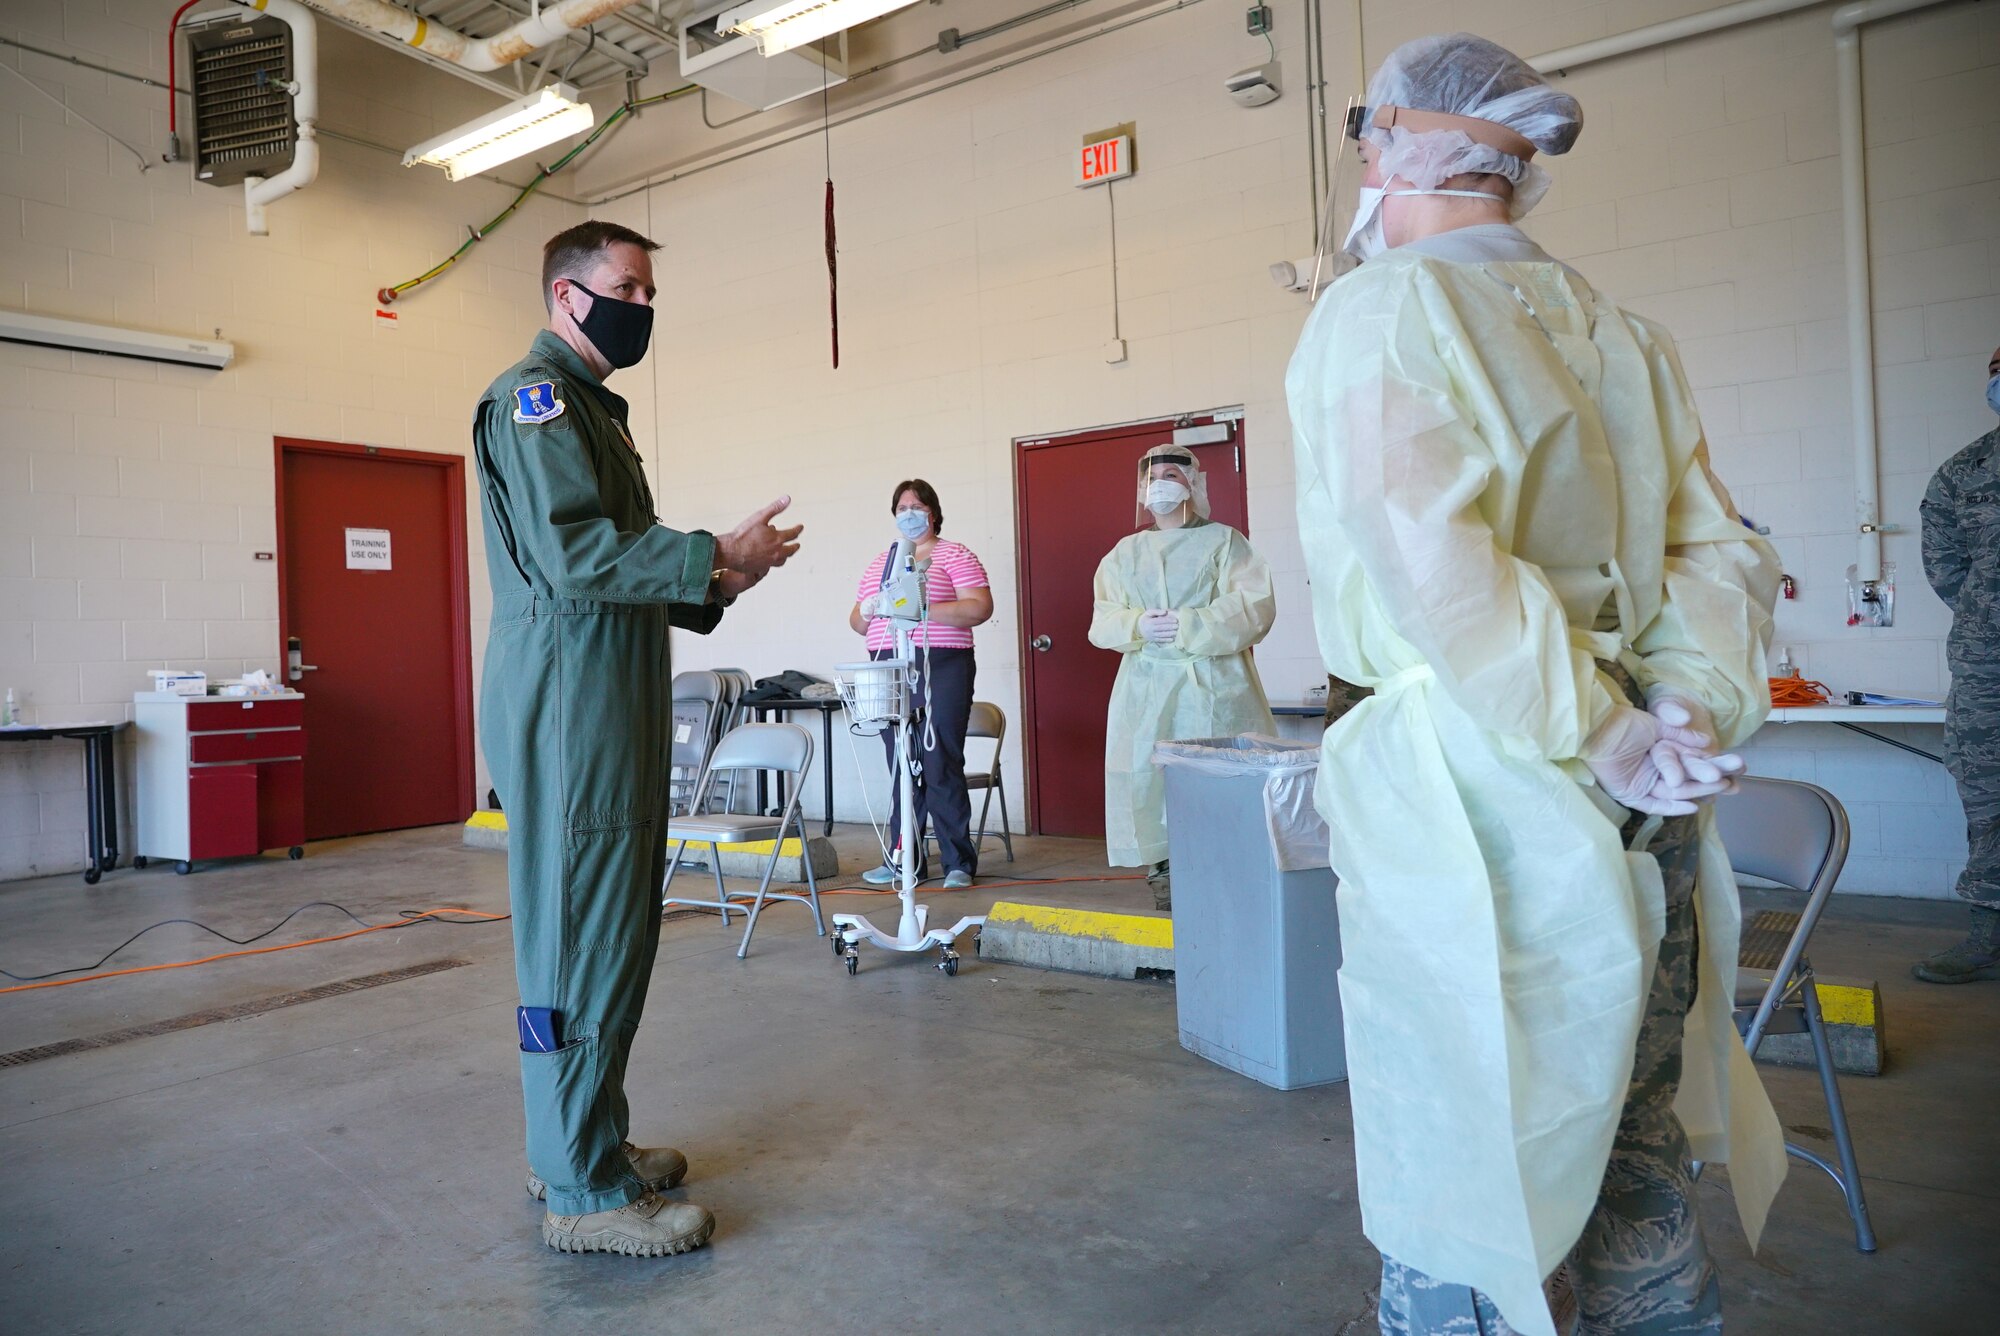 Man in flight suit looks at woman in medical protective gear as he talks.